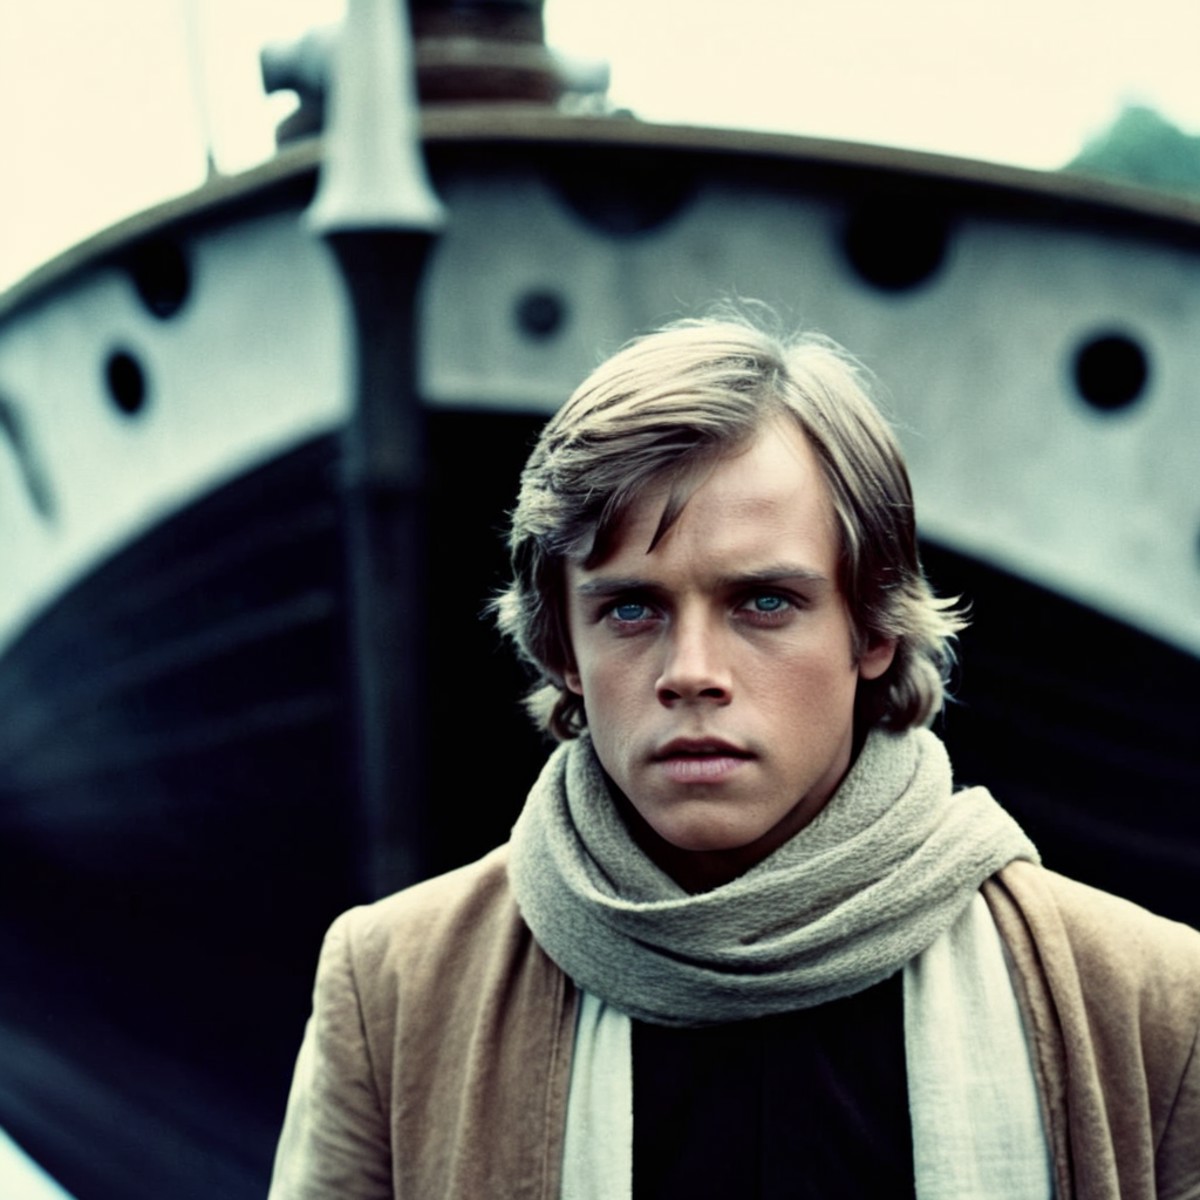 cinematic film still of  <lora:Luke Skywalker:1.2>
Luke Skywalker a young man with a scarf on standing in front of a boat ...